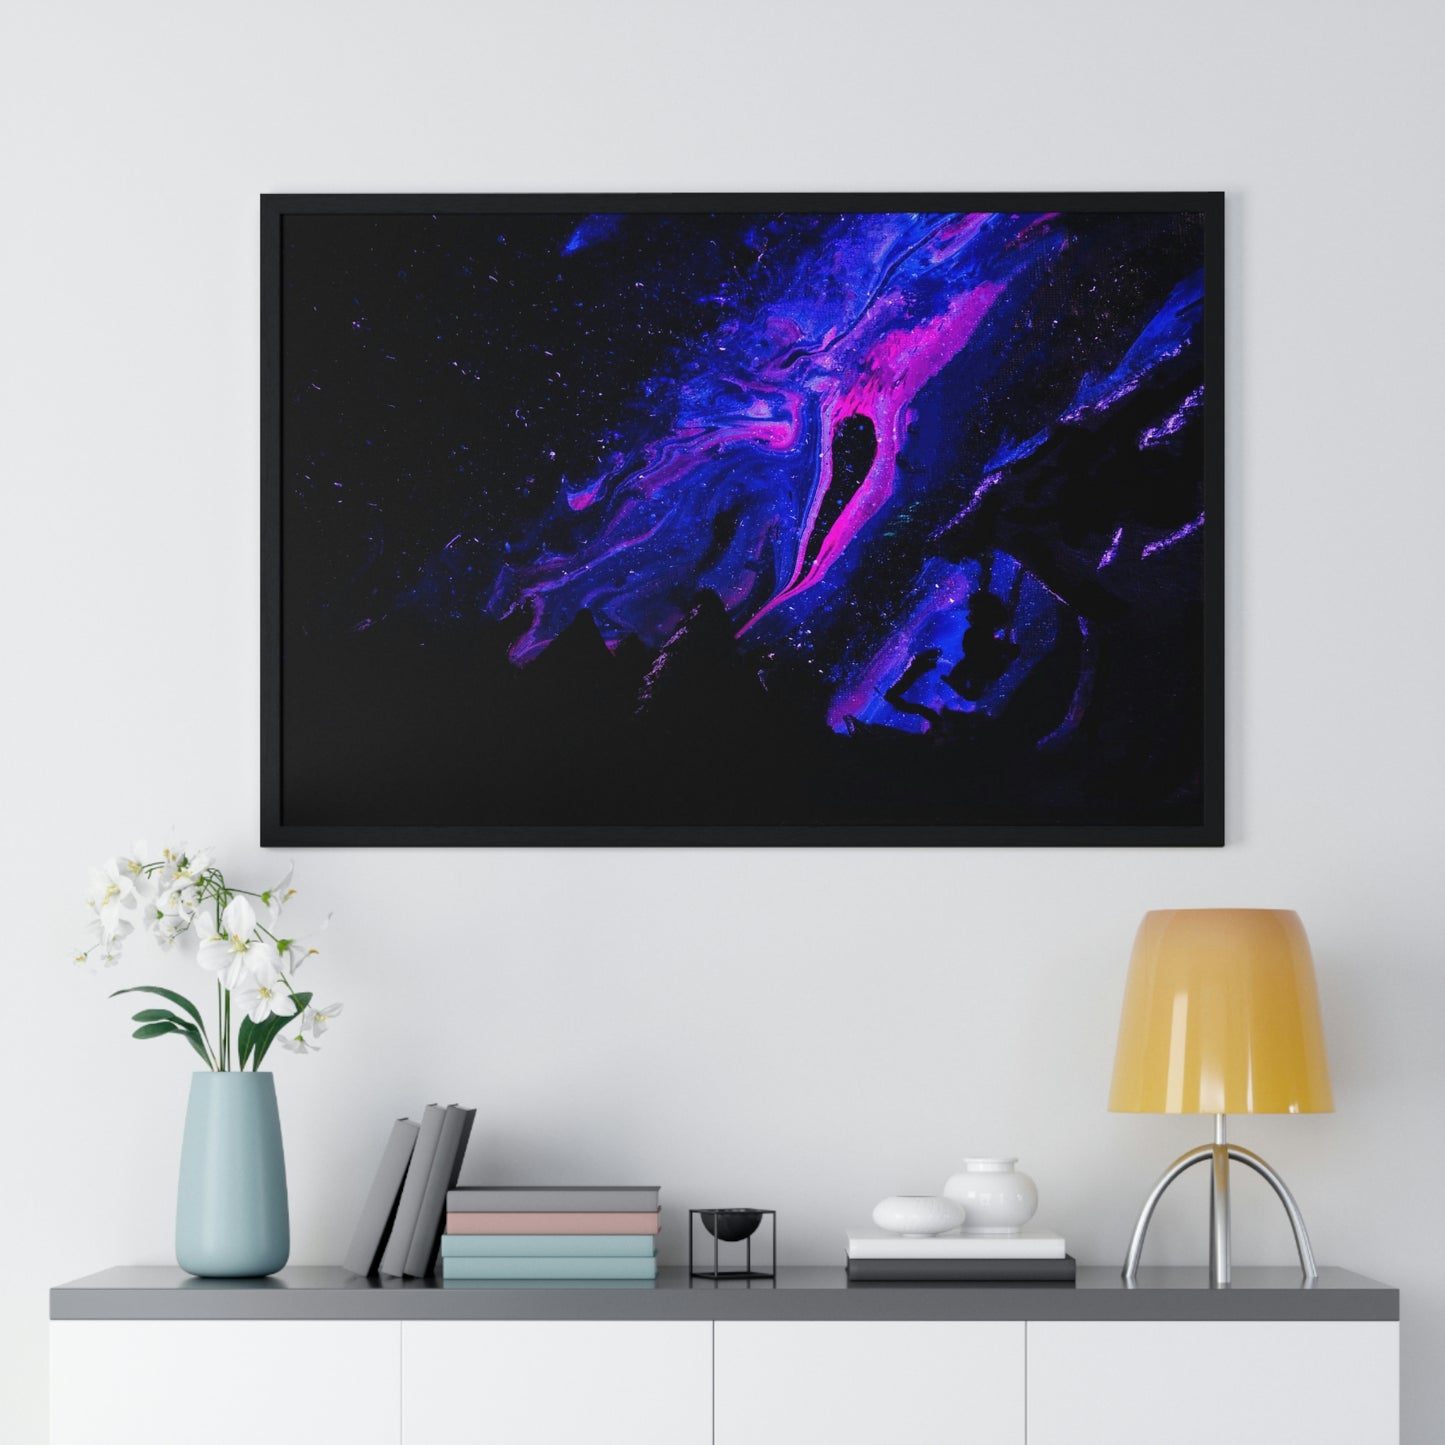 A Midnight Galaxy View Poster